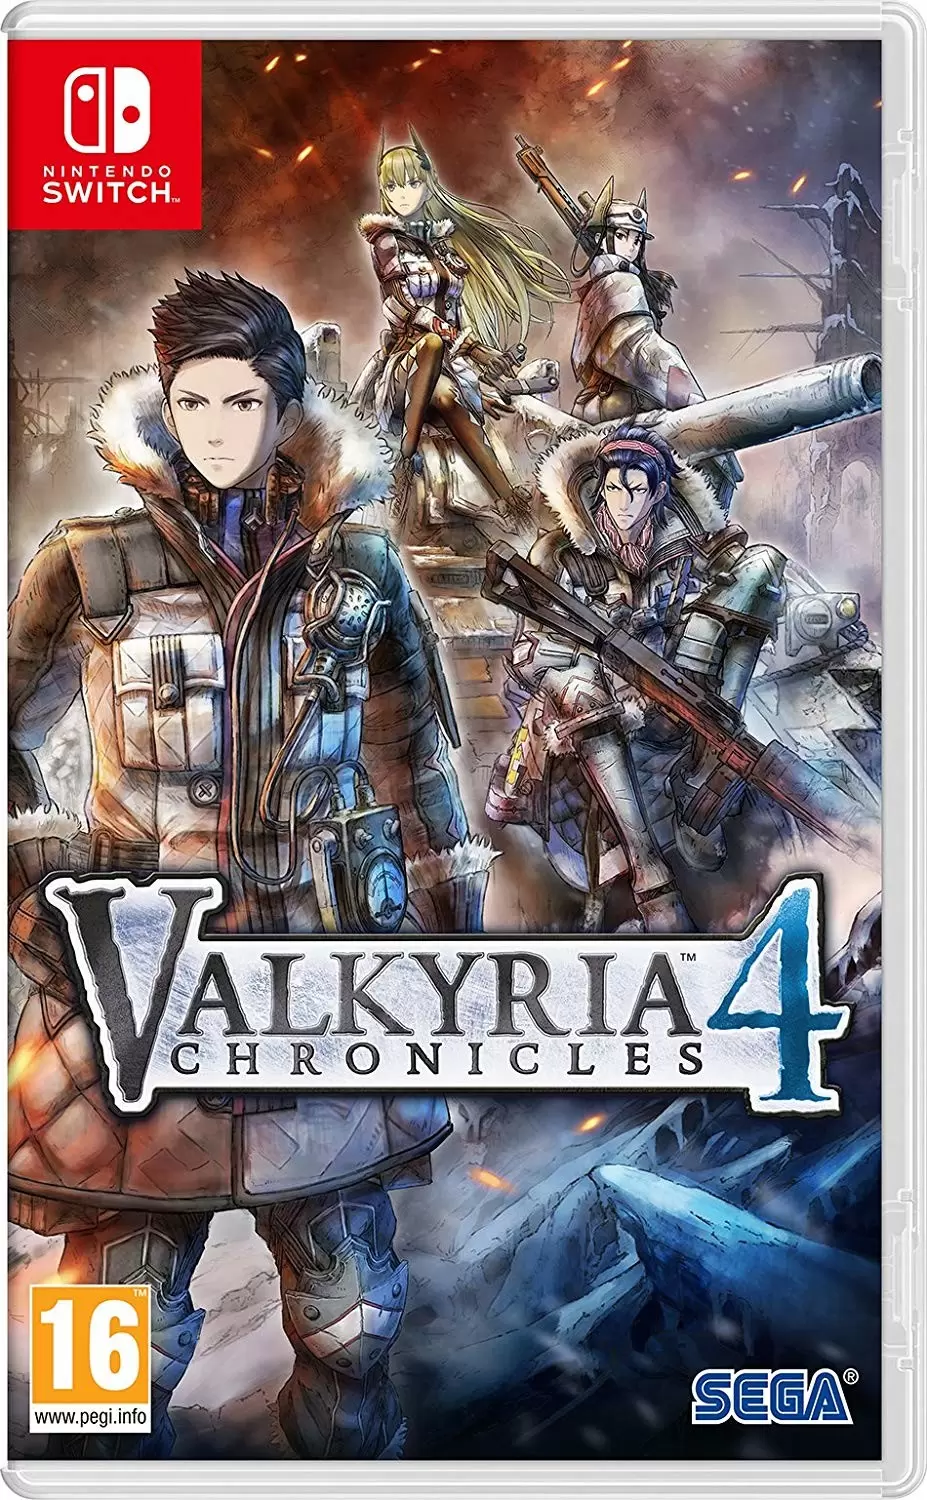 Nintendo Switch Games - Valkyria Chronicles 4